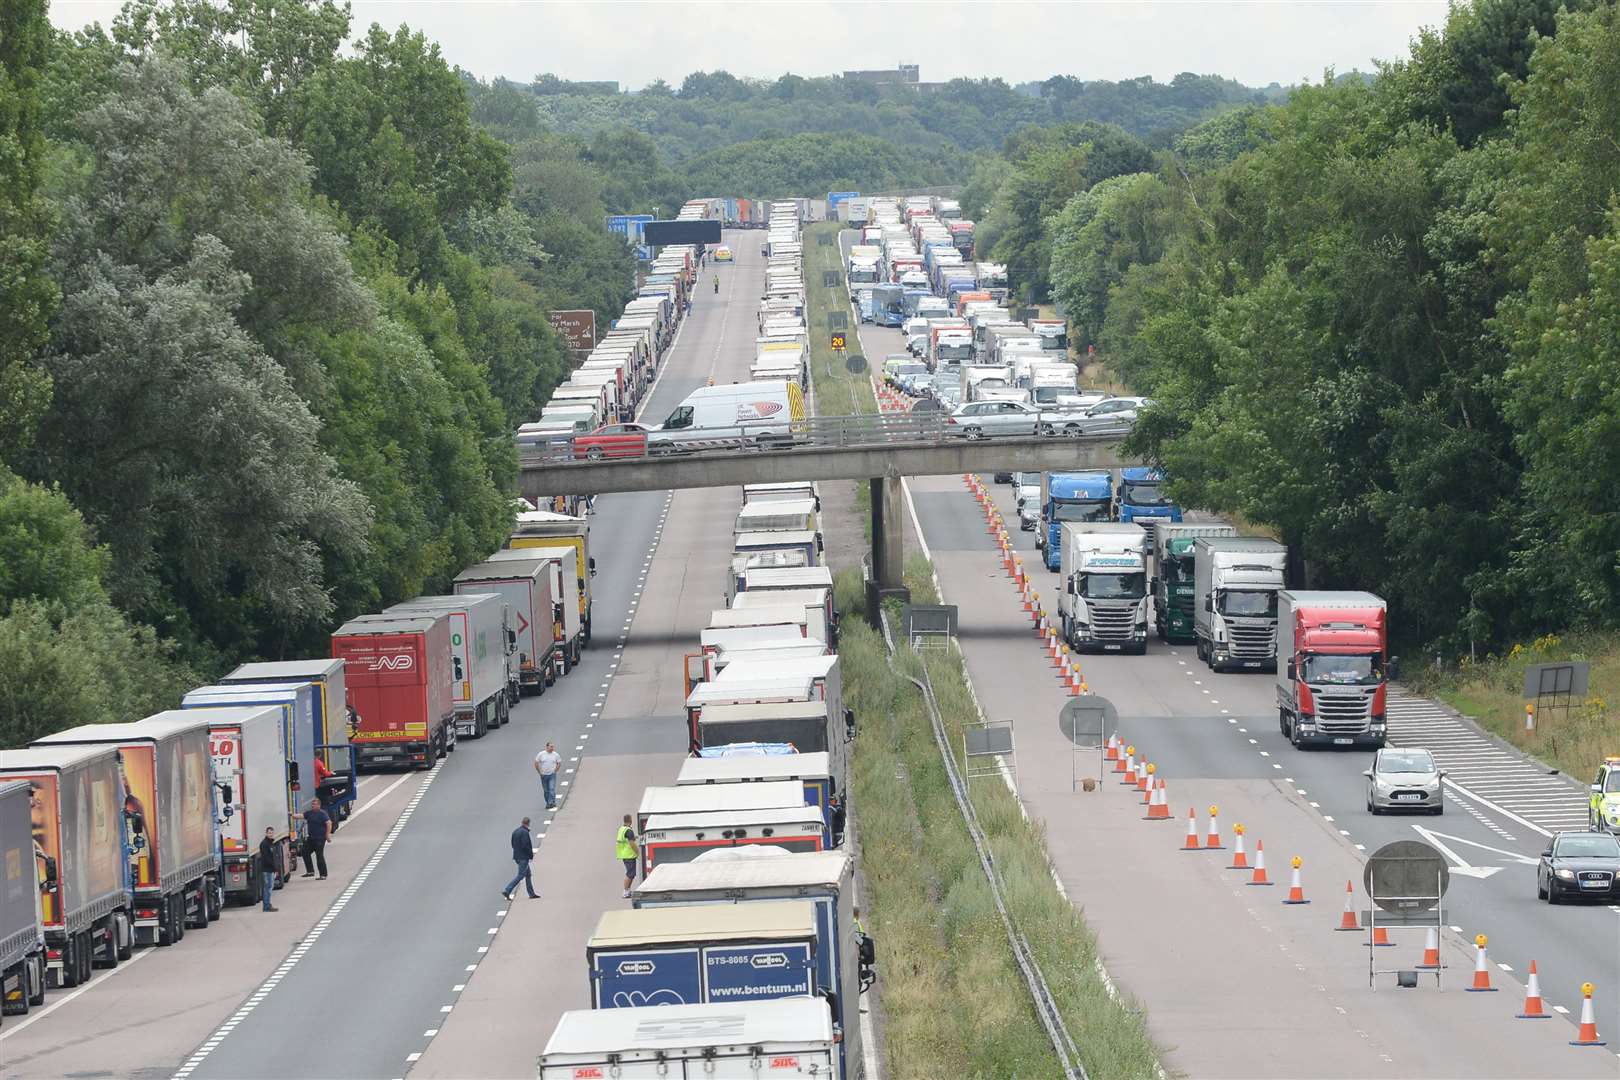 The Operation Stack chaos of 2015